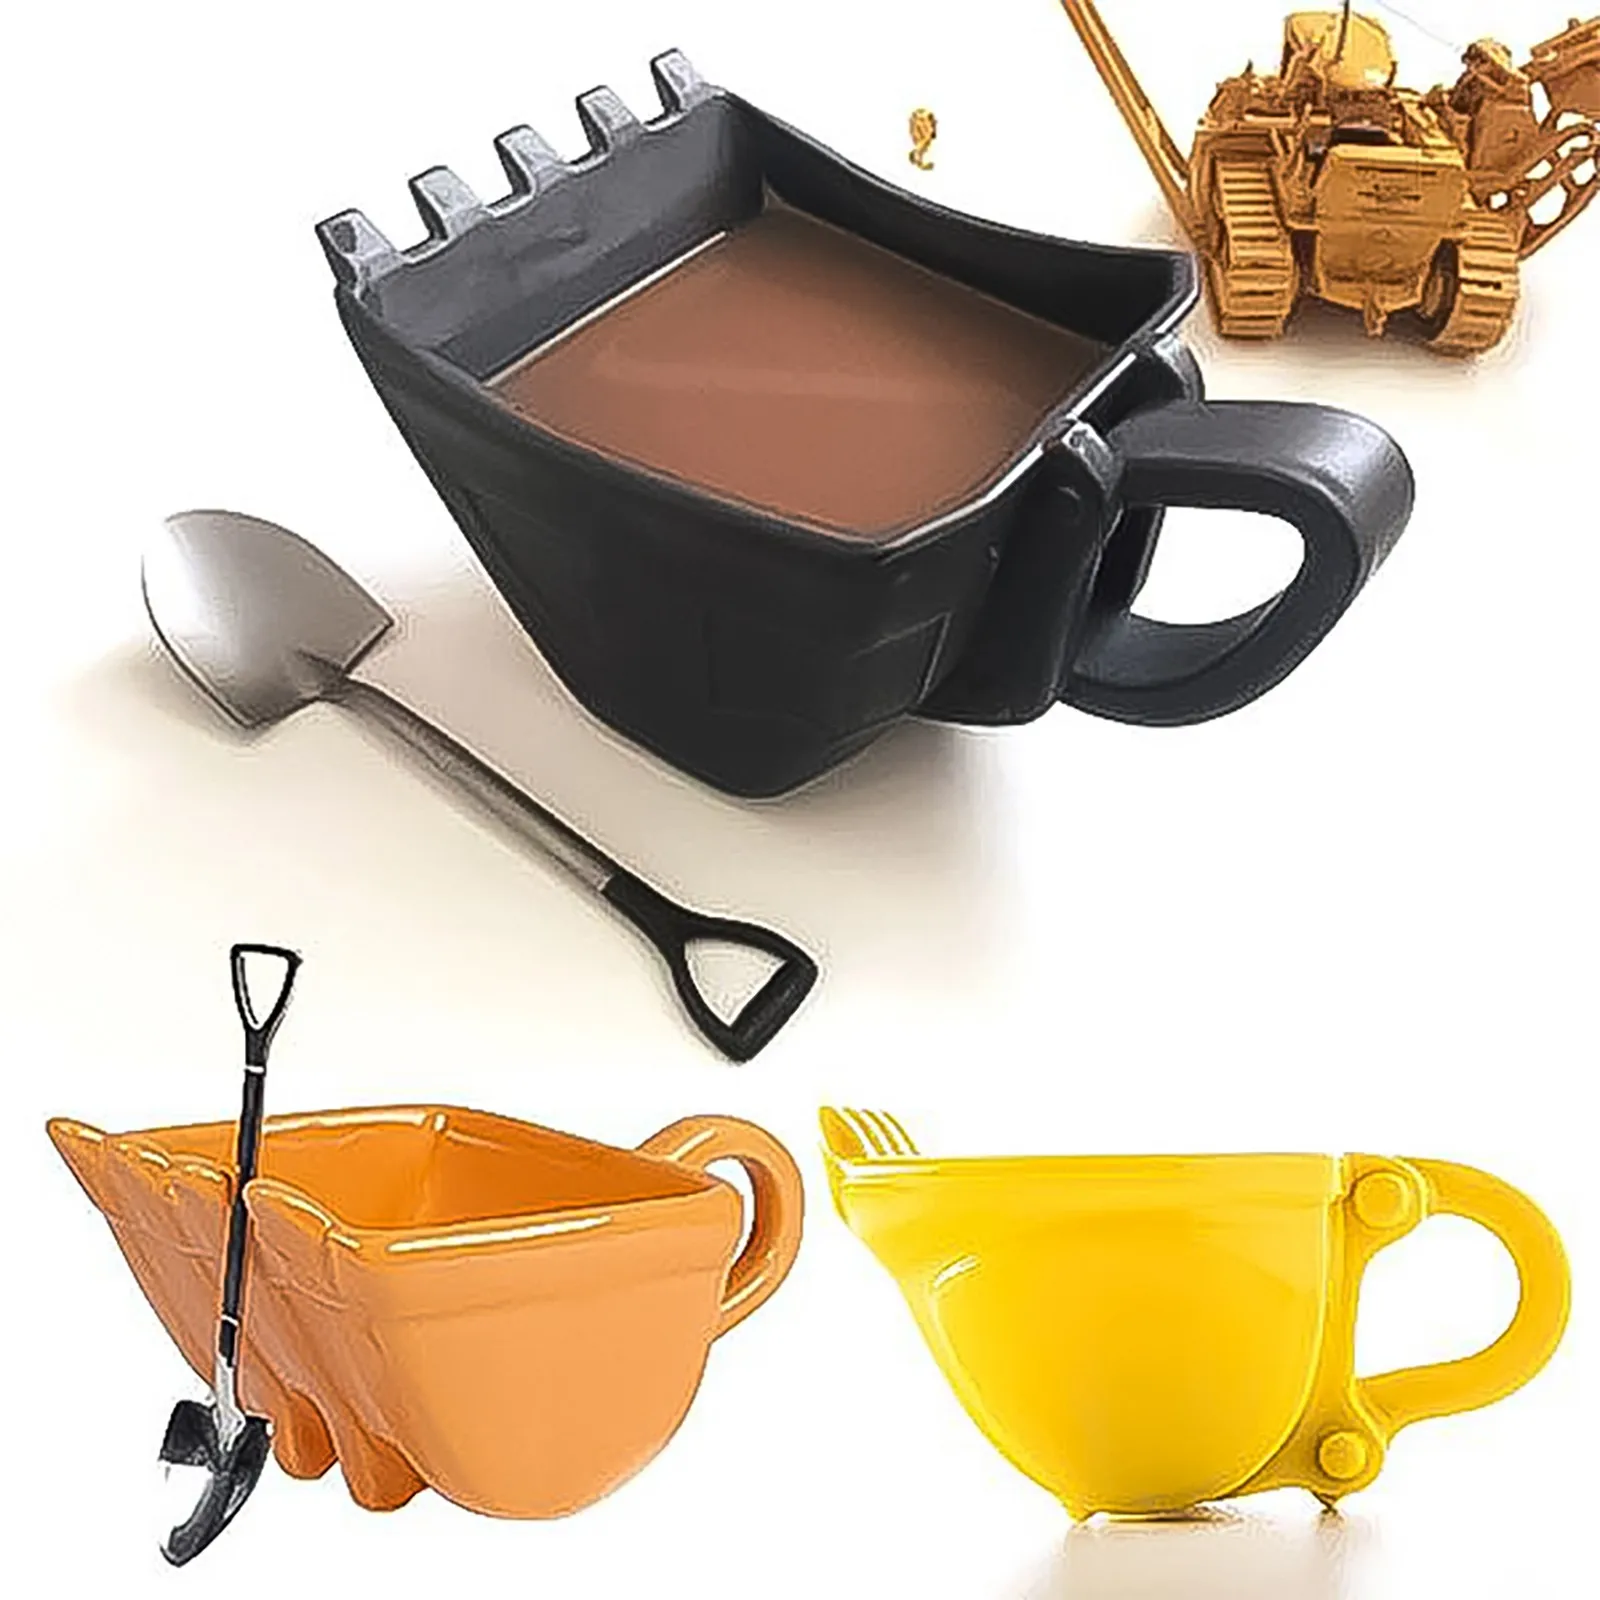 

330ml Excavator Bucket Cup With Spade Shovel Spoon Funny Plastic Ashtray Creative Cake Container Tea Digger Small Gift For Teen